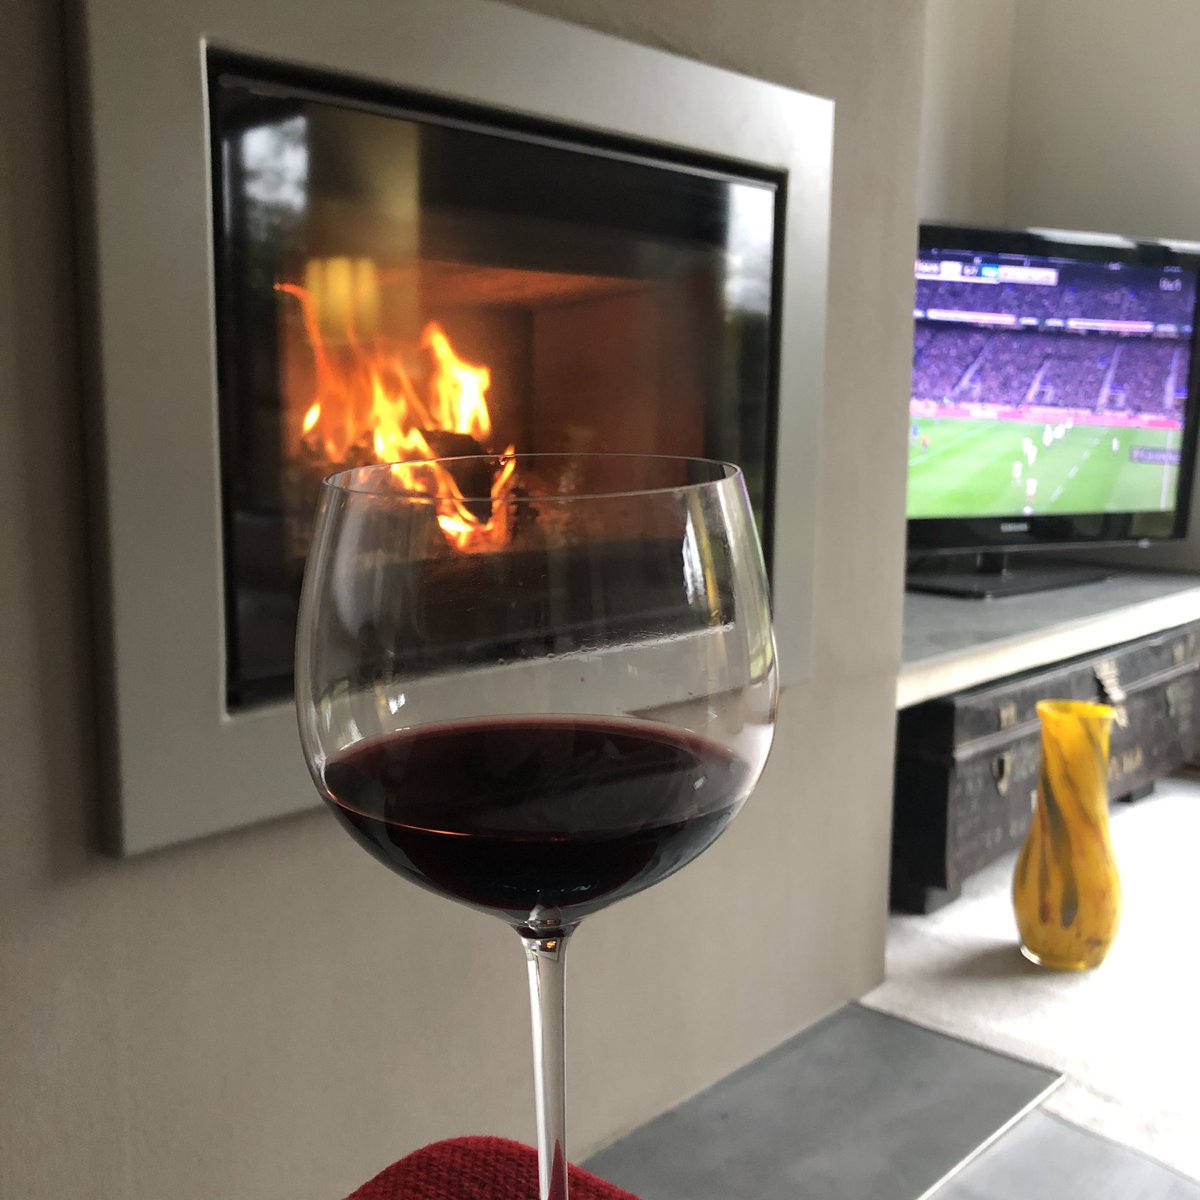 Well, there’s no point pretending there’s no rugby, when the fire is lit and a Rioja Gran Reserva has been pressed into my hand 
🔥🏉🍷

#GuinnessSixNations
#EnglandRugby
#frenchrugby
#woodburningstove
#rioja
#spanishwine